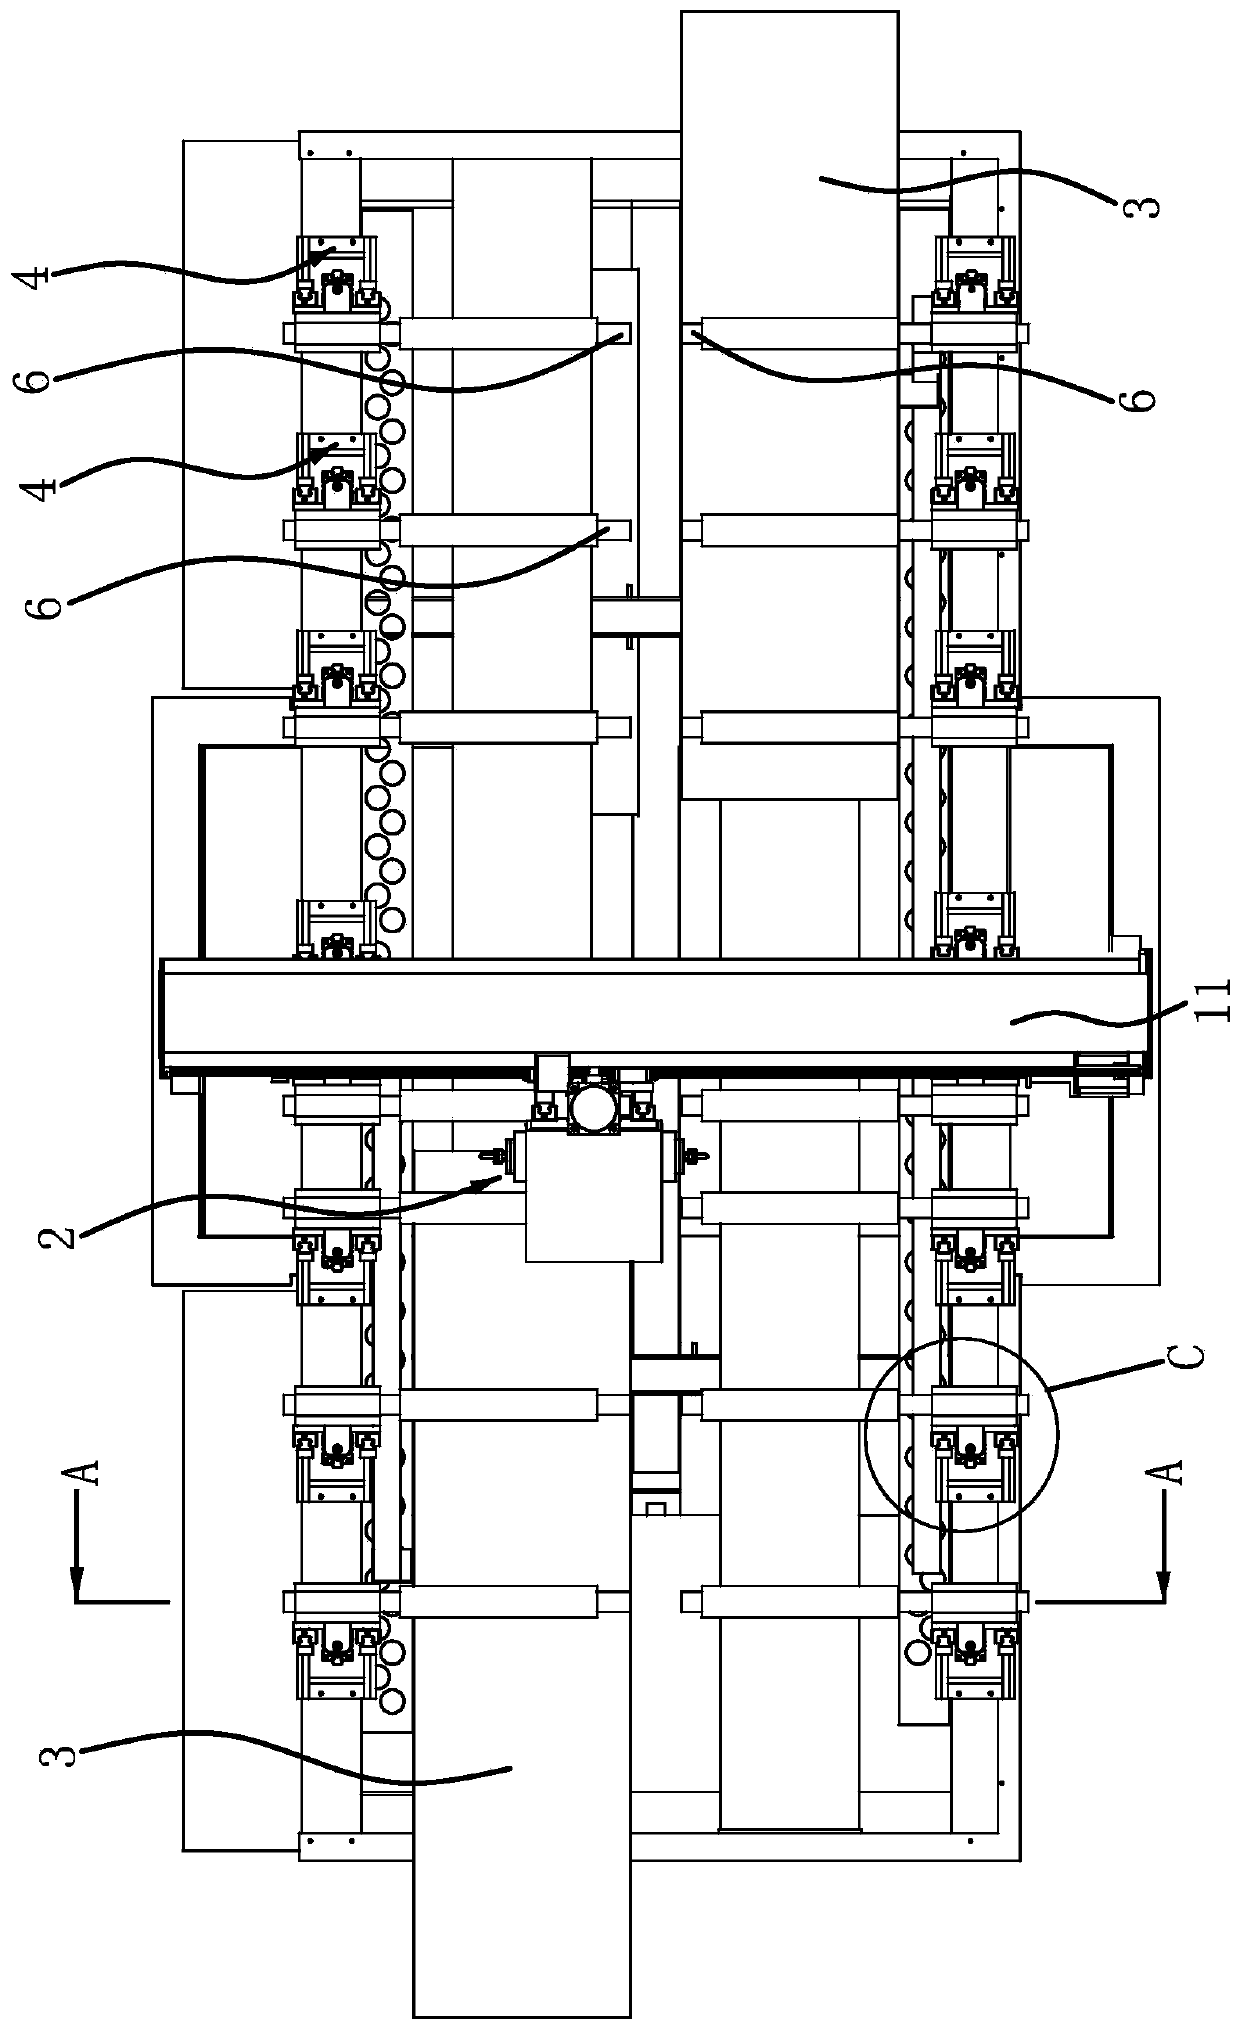 Positioning structure of carpentry machining center